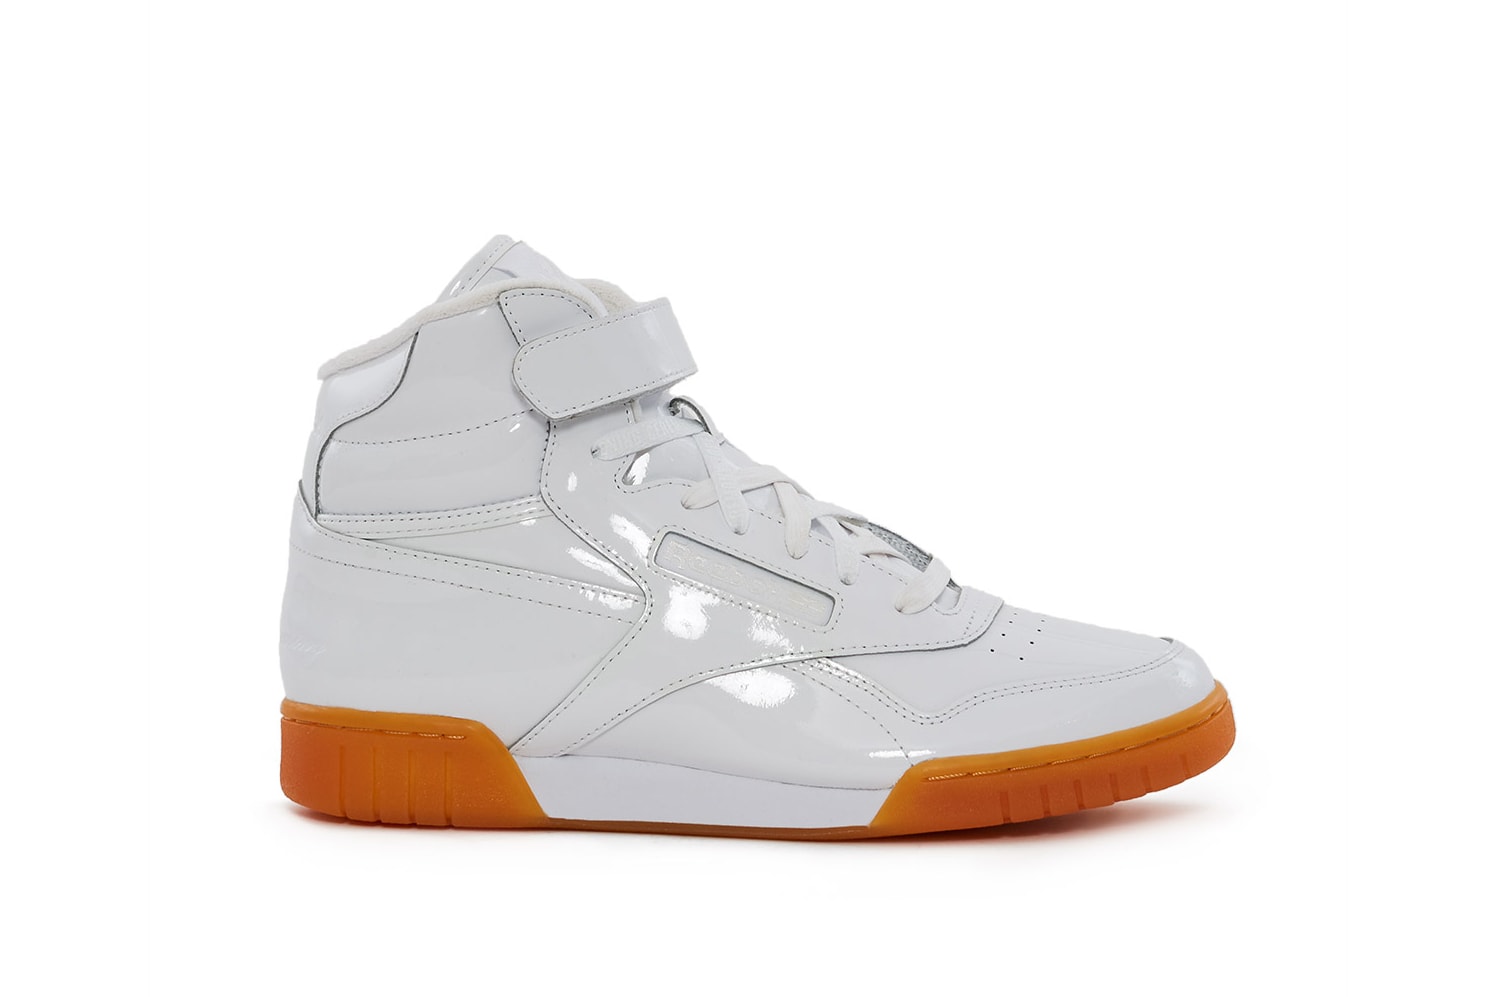 Reebok Opening Ceremony Sneaker Collaboration Patent Leather Glossy Reebok Classic Leather Opening Ceremony Workout Ex-O-Fit